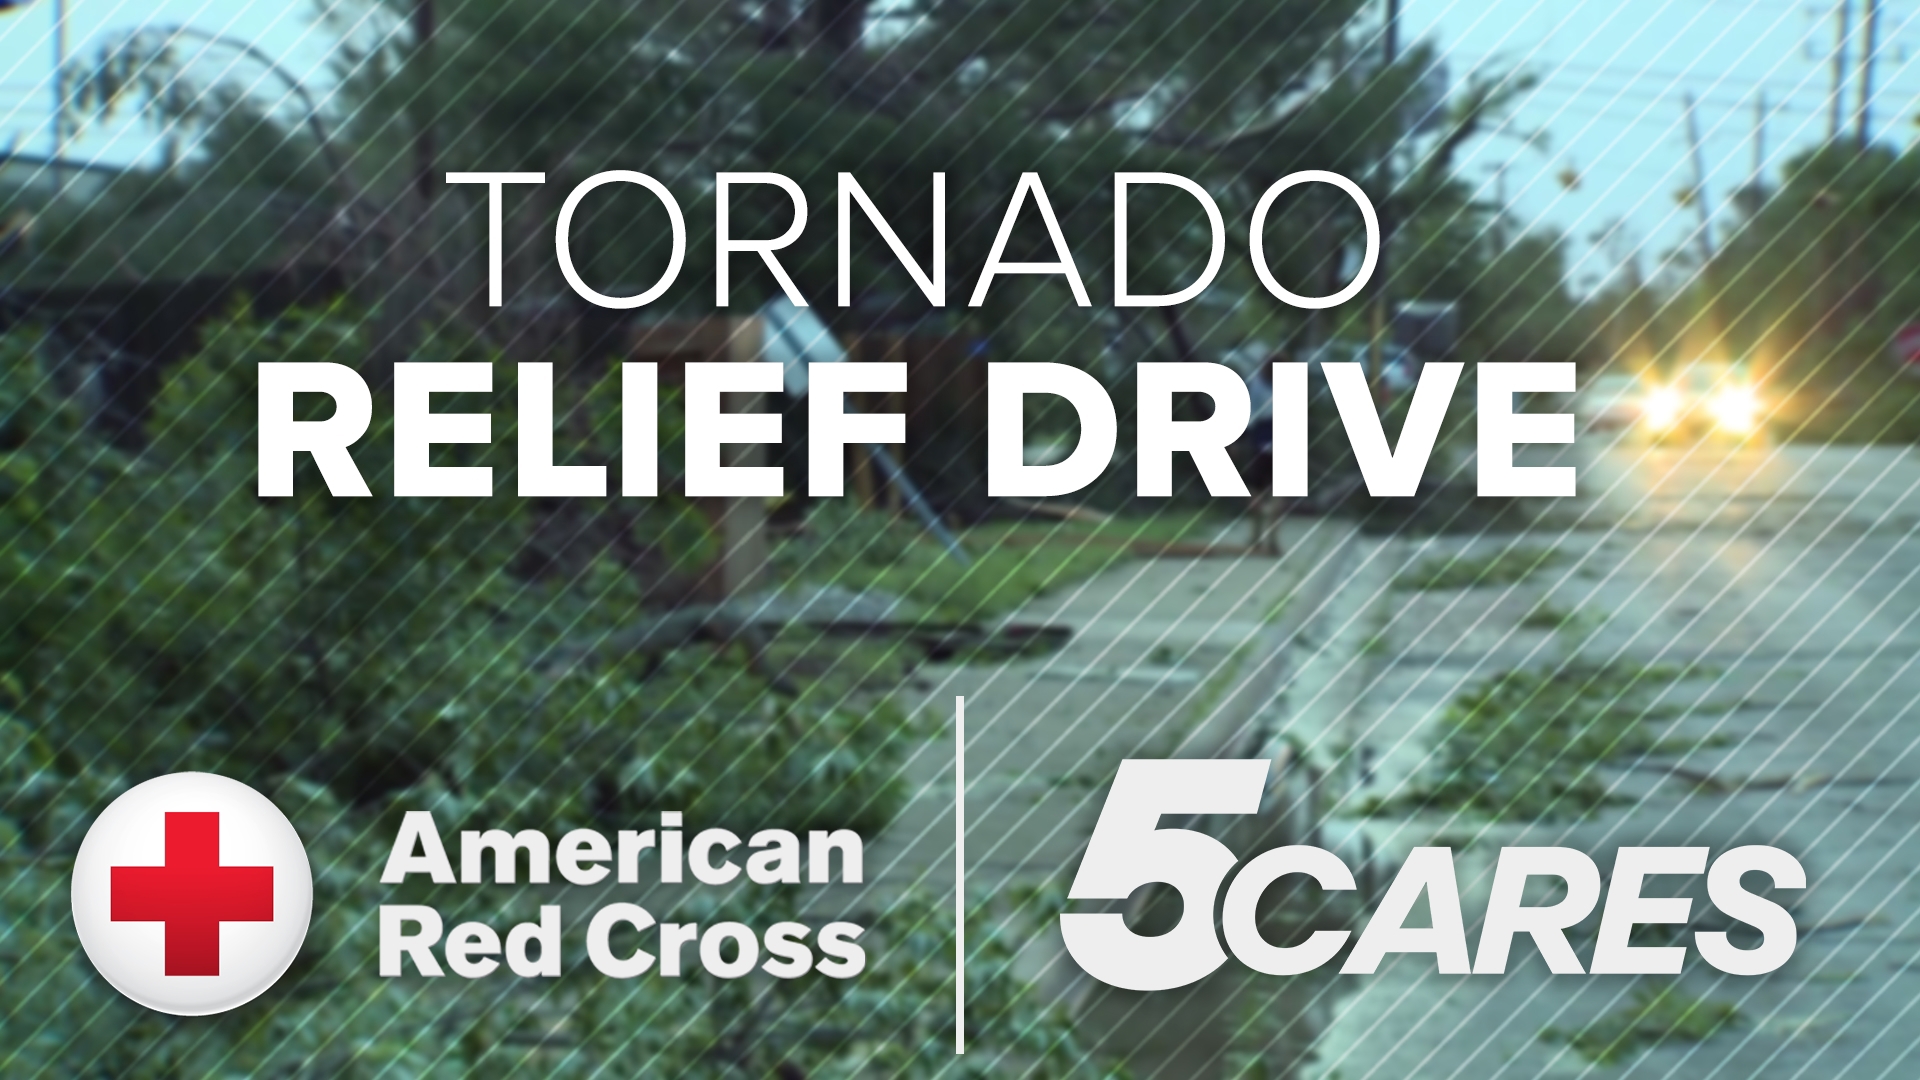 5CARES Tornado Relief Drive with American Red Cross